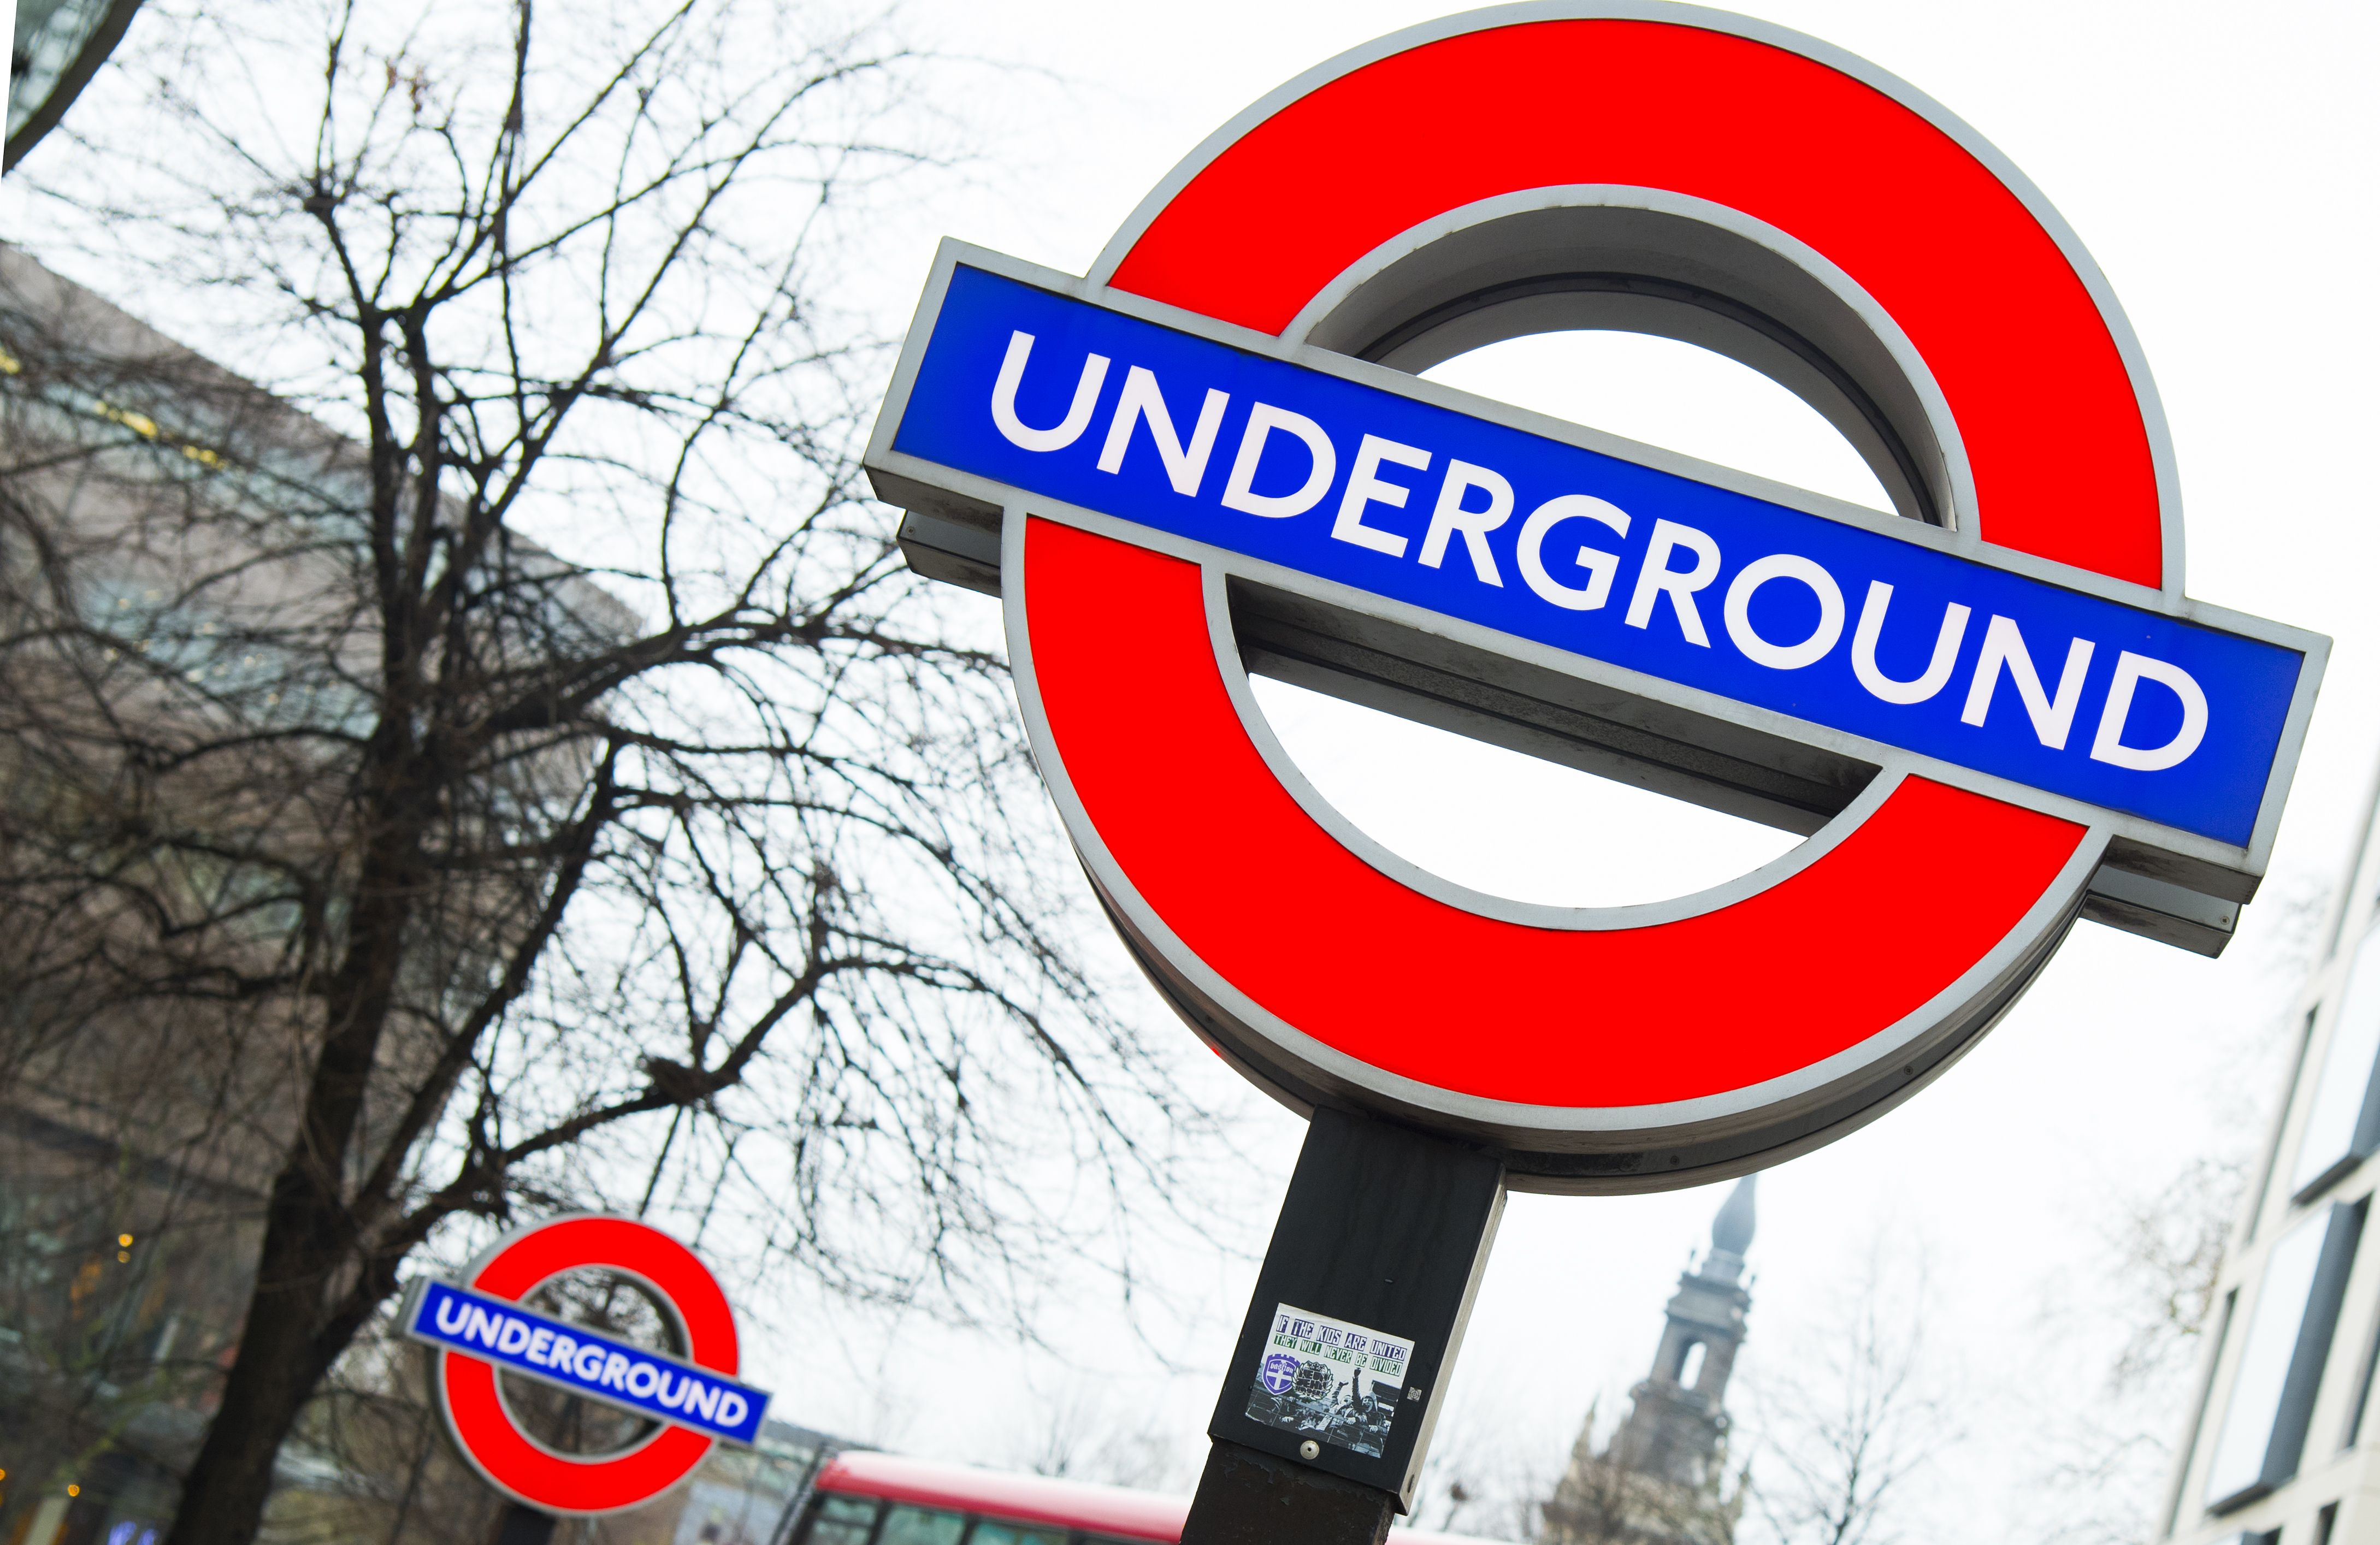 The London Underground is to be hit by a fresh strike